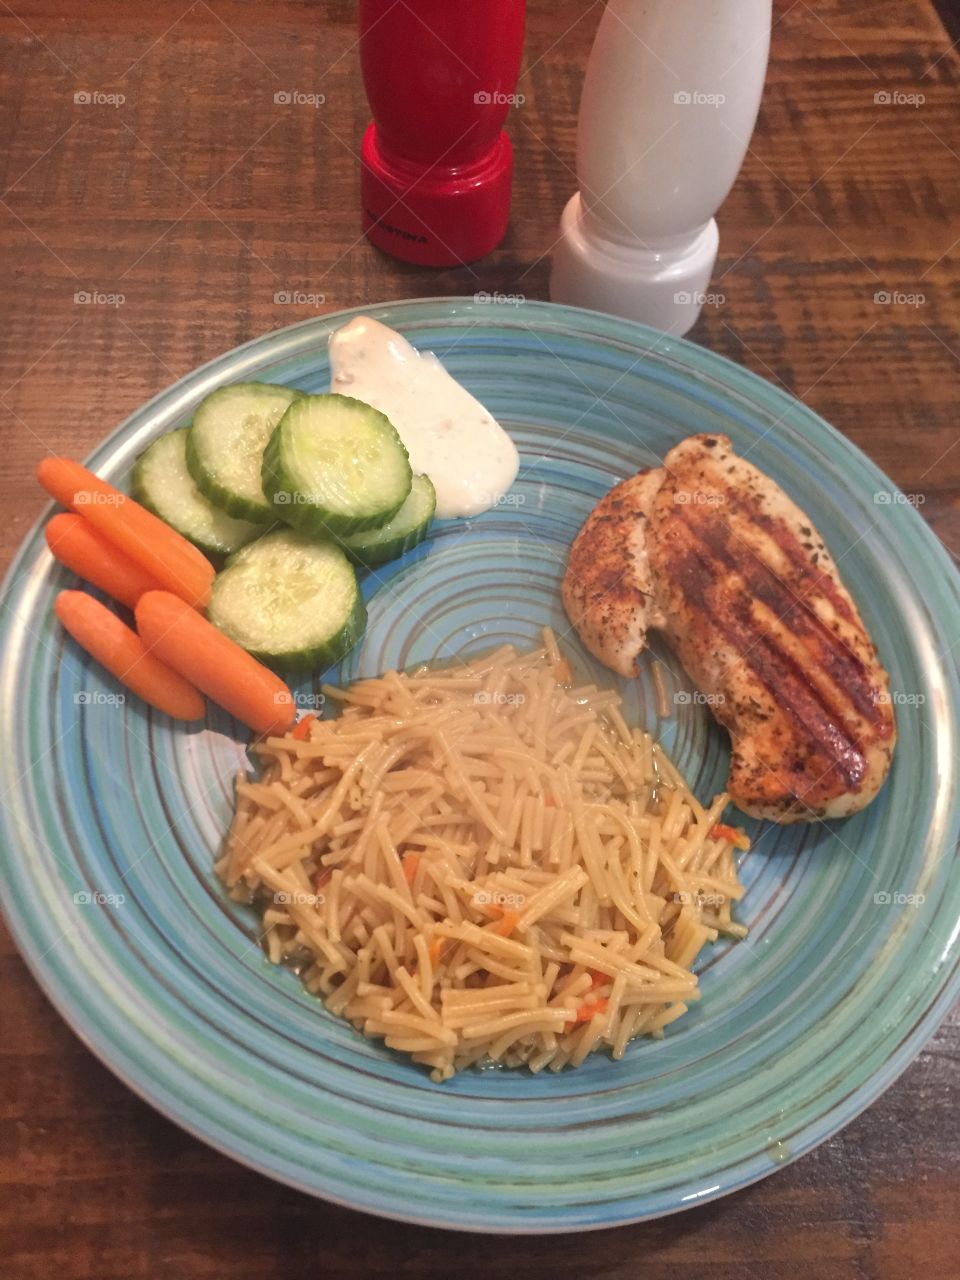 This is a great meal grilled chicken with blackened chicken spice honey garlic noodles Raw vegetables Definitely a winner in my house.